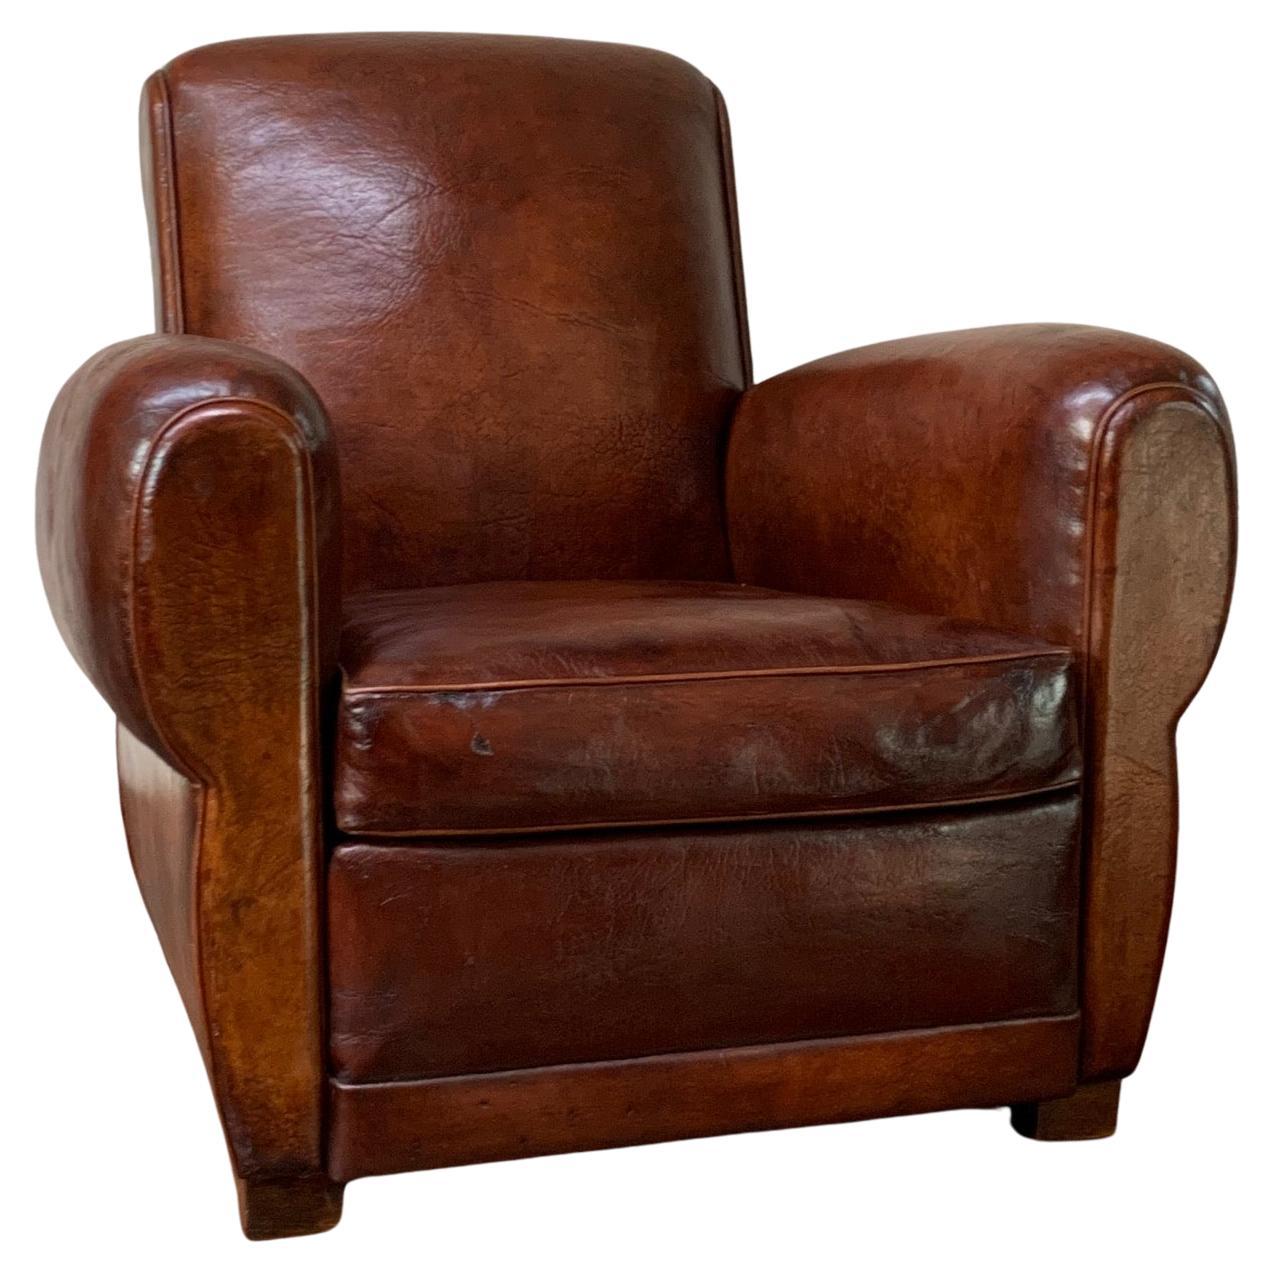 A Stunning French, Leather Club Chair, Havana Lounge Model Circa 1930's